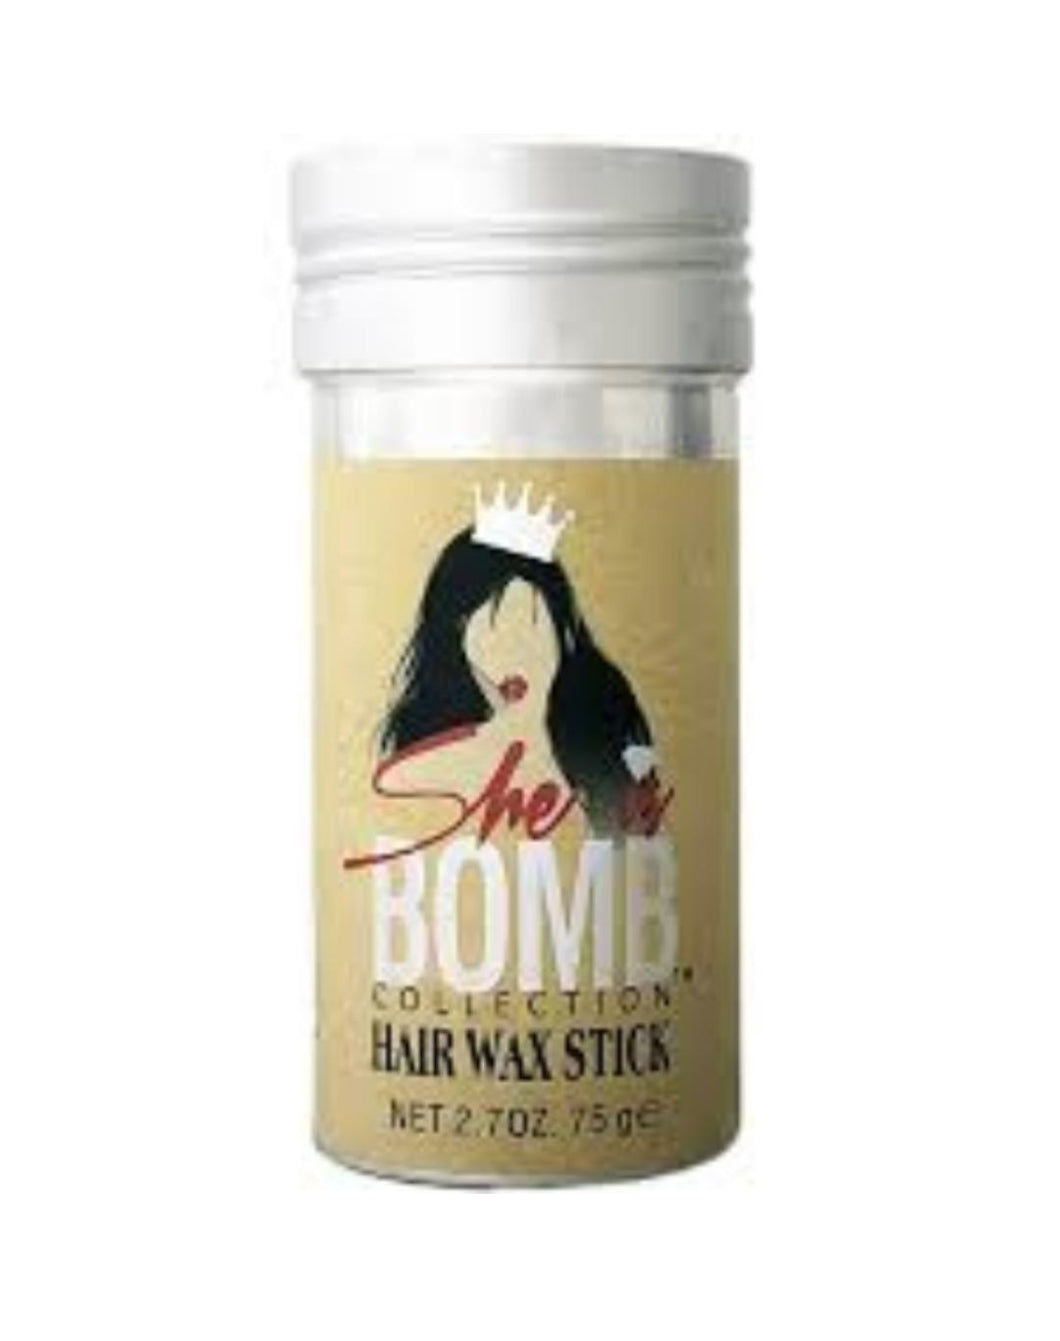 She Is Bomb Hair Wax Stick